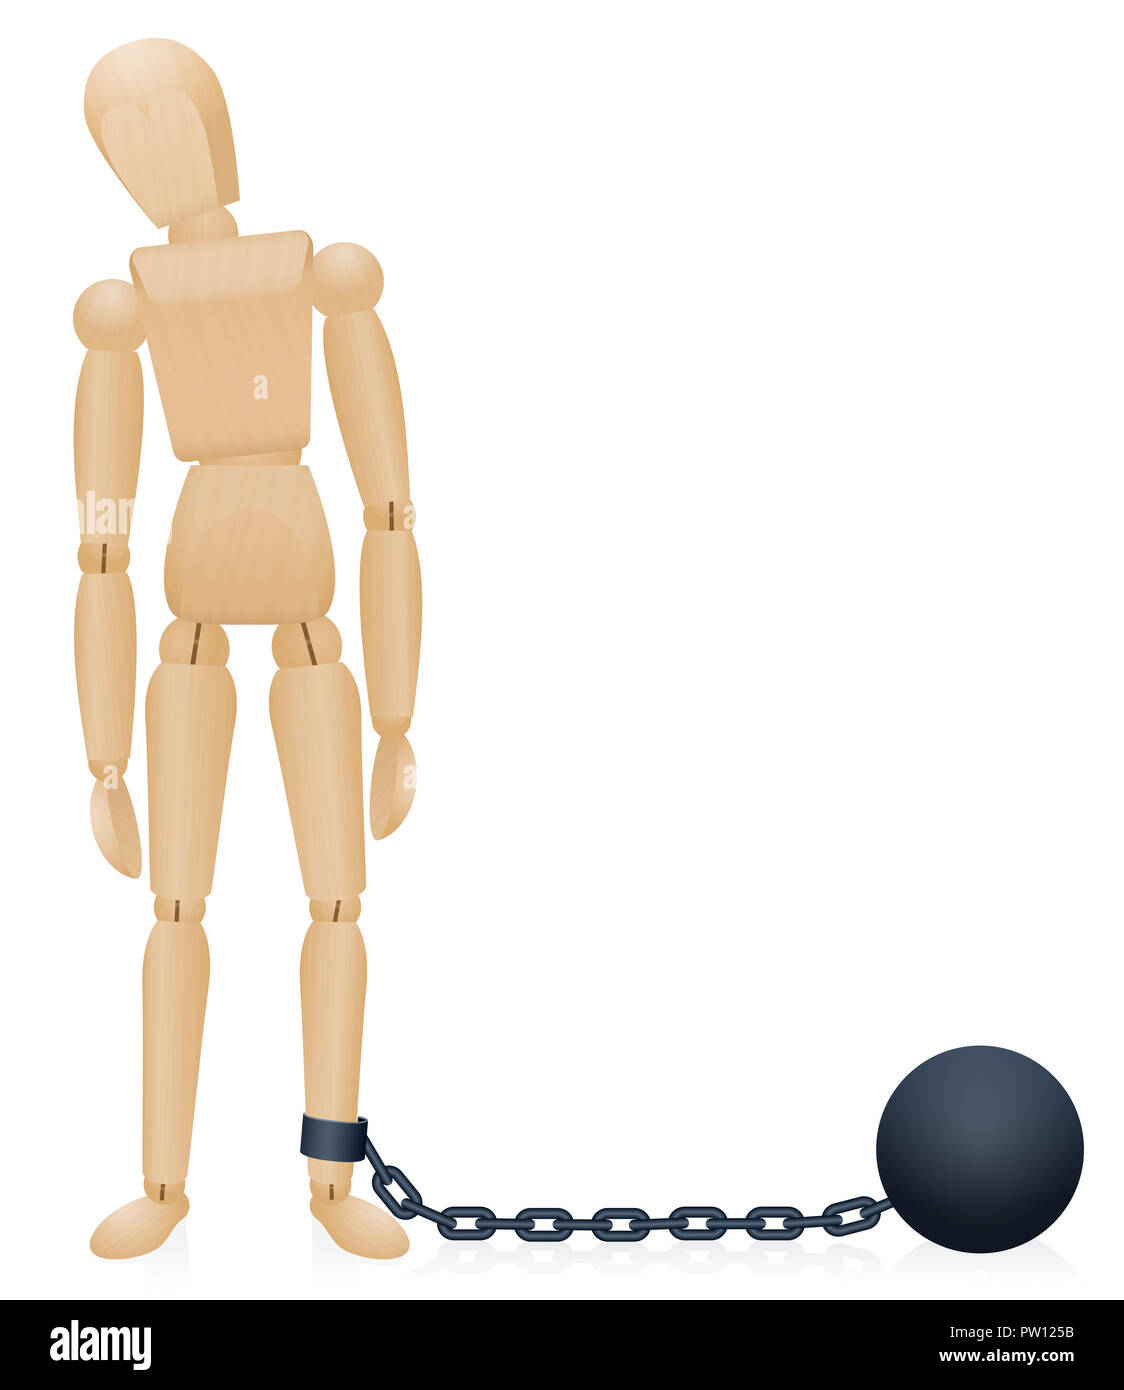 Prison ball and chain. Chained wooden manikin figure - comic illustration on white background. Stock Photo